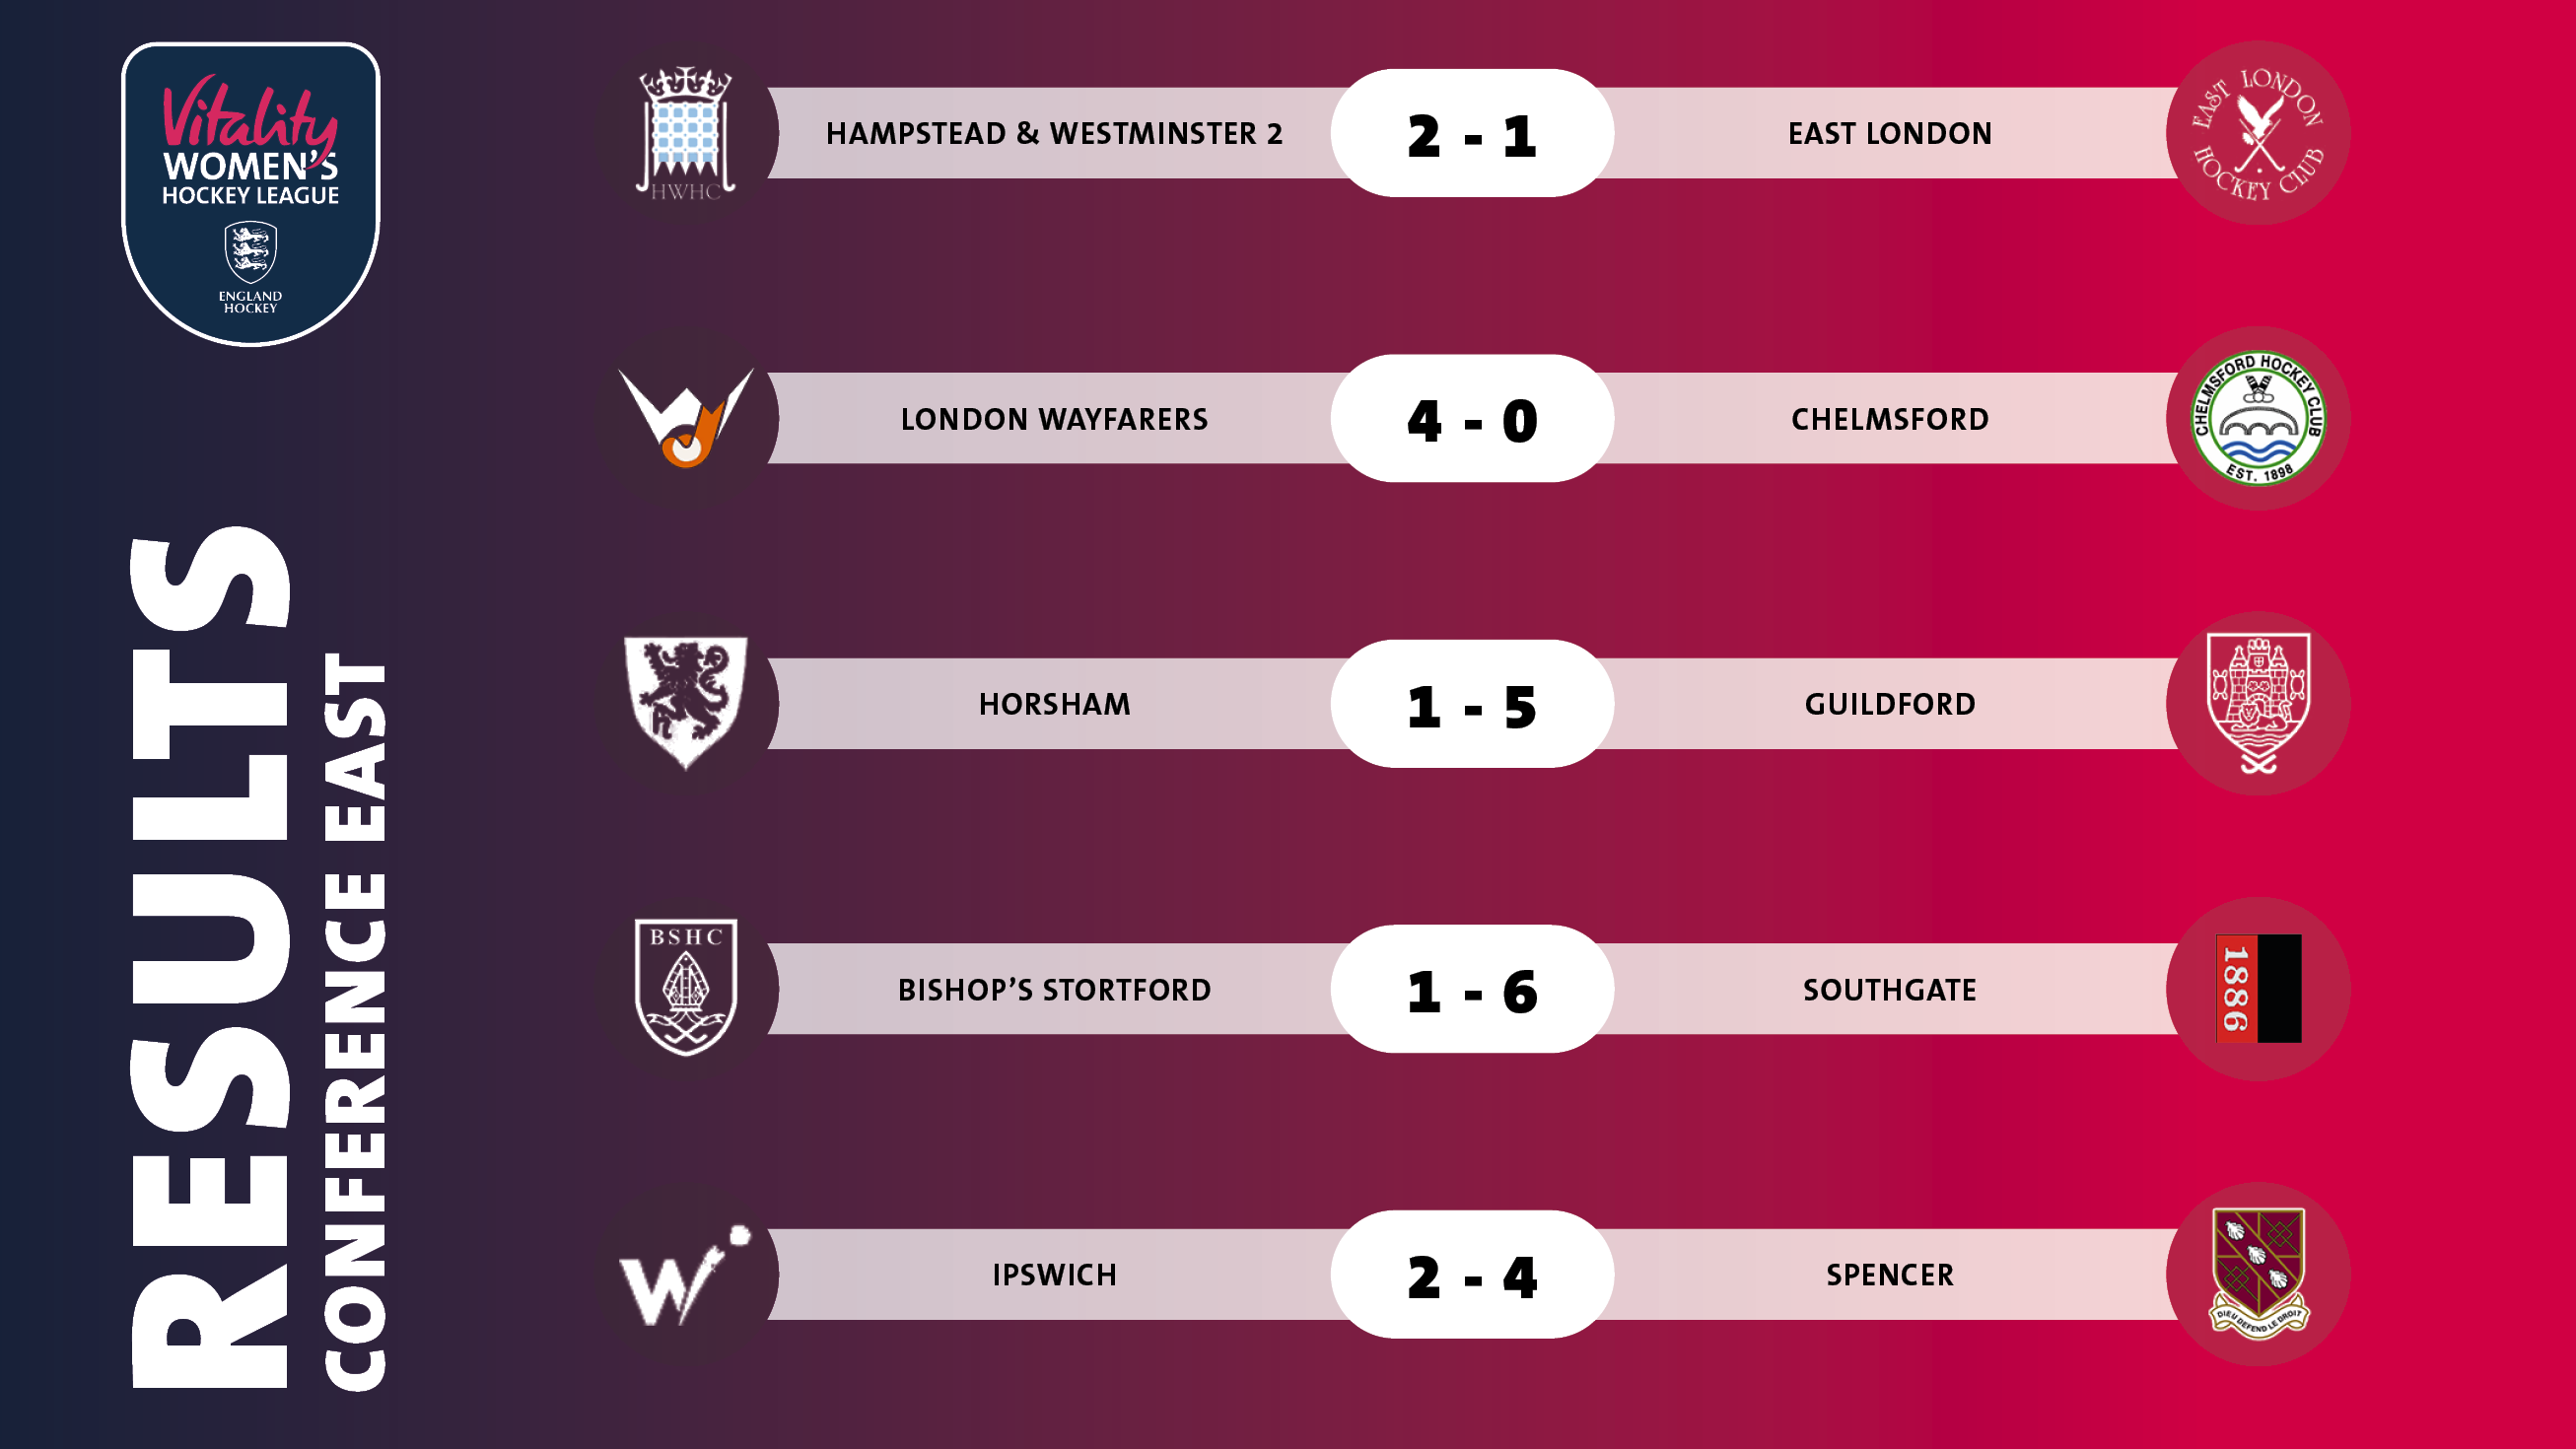 - England: Vitality Women's Hockey League Week 6 2022 Review - Week 6 of the Vitality Women's Hockey League produced a few surprise results and outstanding performances up and down the country as the Vitality Women's Hockey League entertains once again.